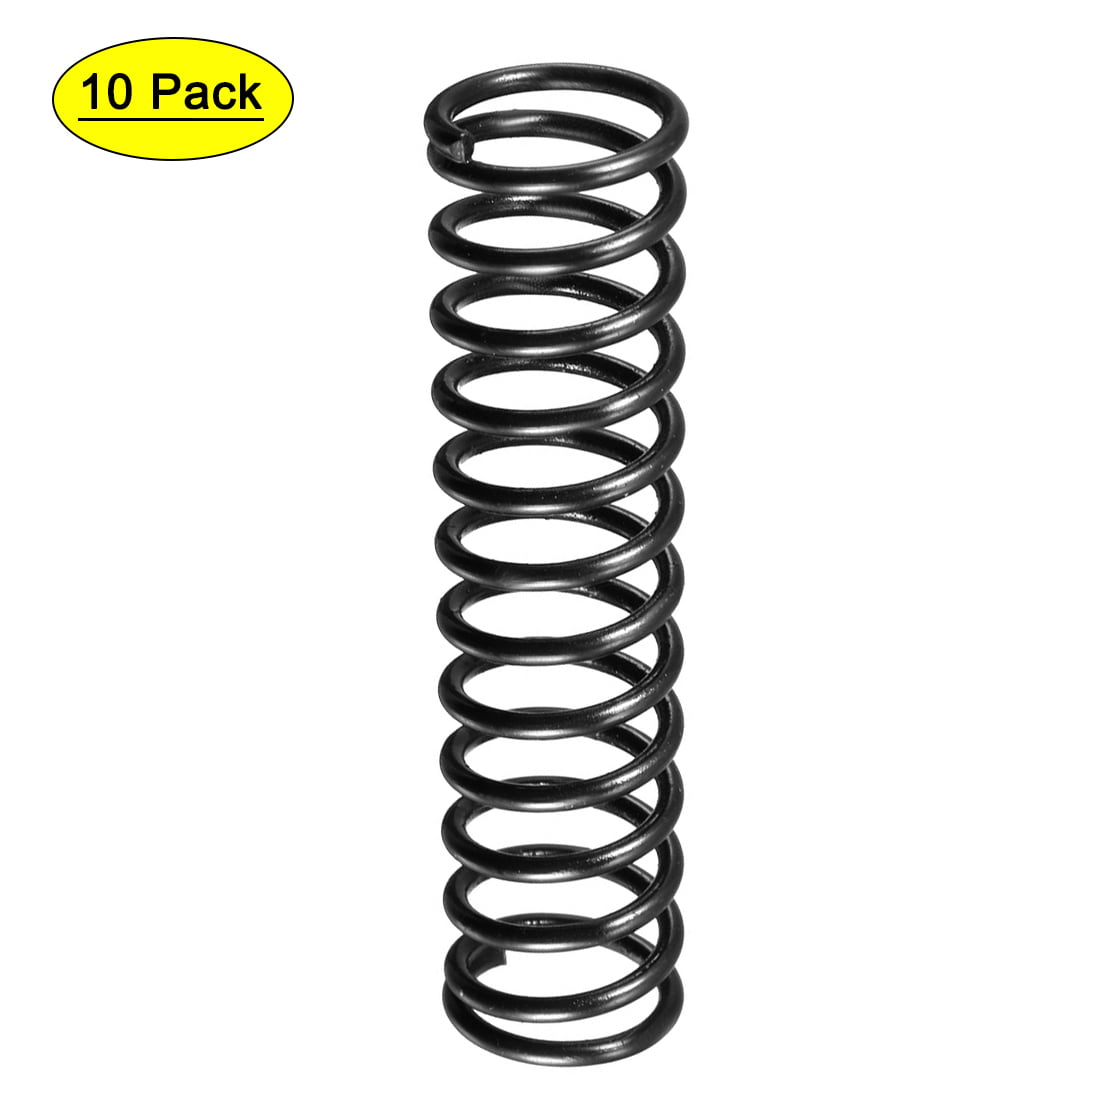 SPRINGS 40mm x 11mm X2 PIECES OD 11MM S STEEL COMPRESSION SPRING COIL 1.2MM WIRE 